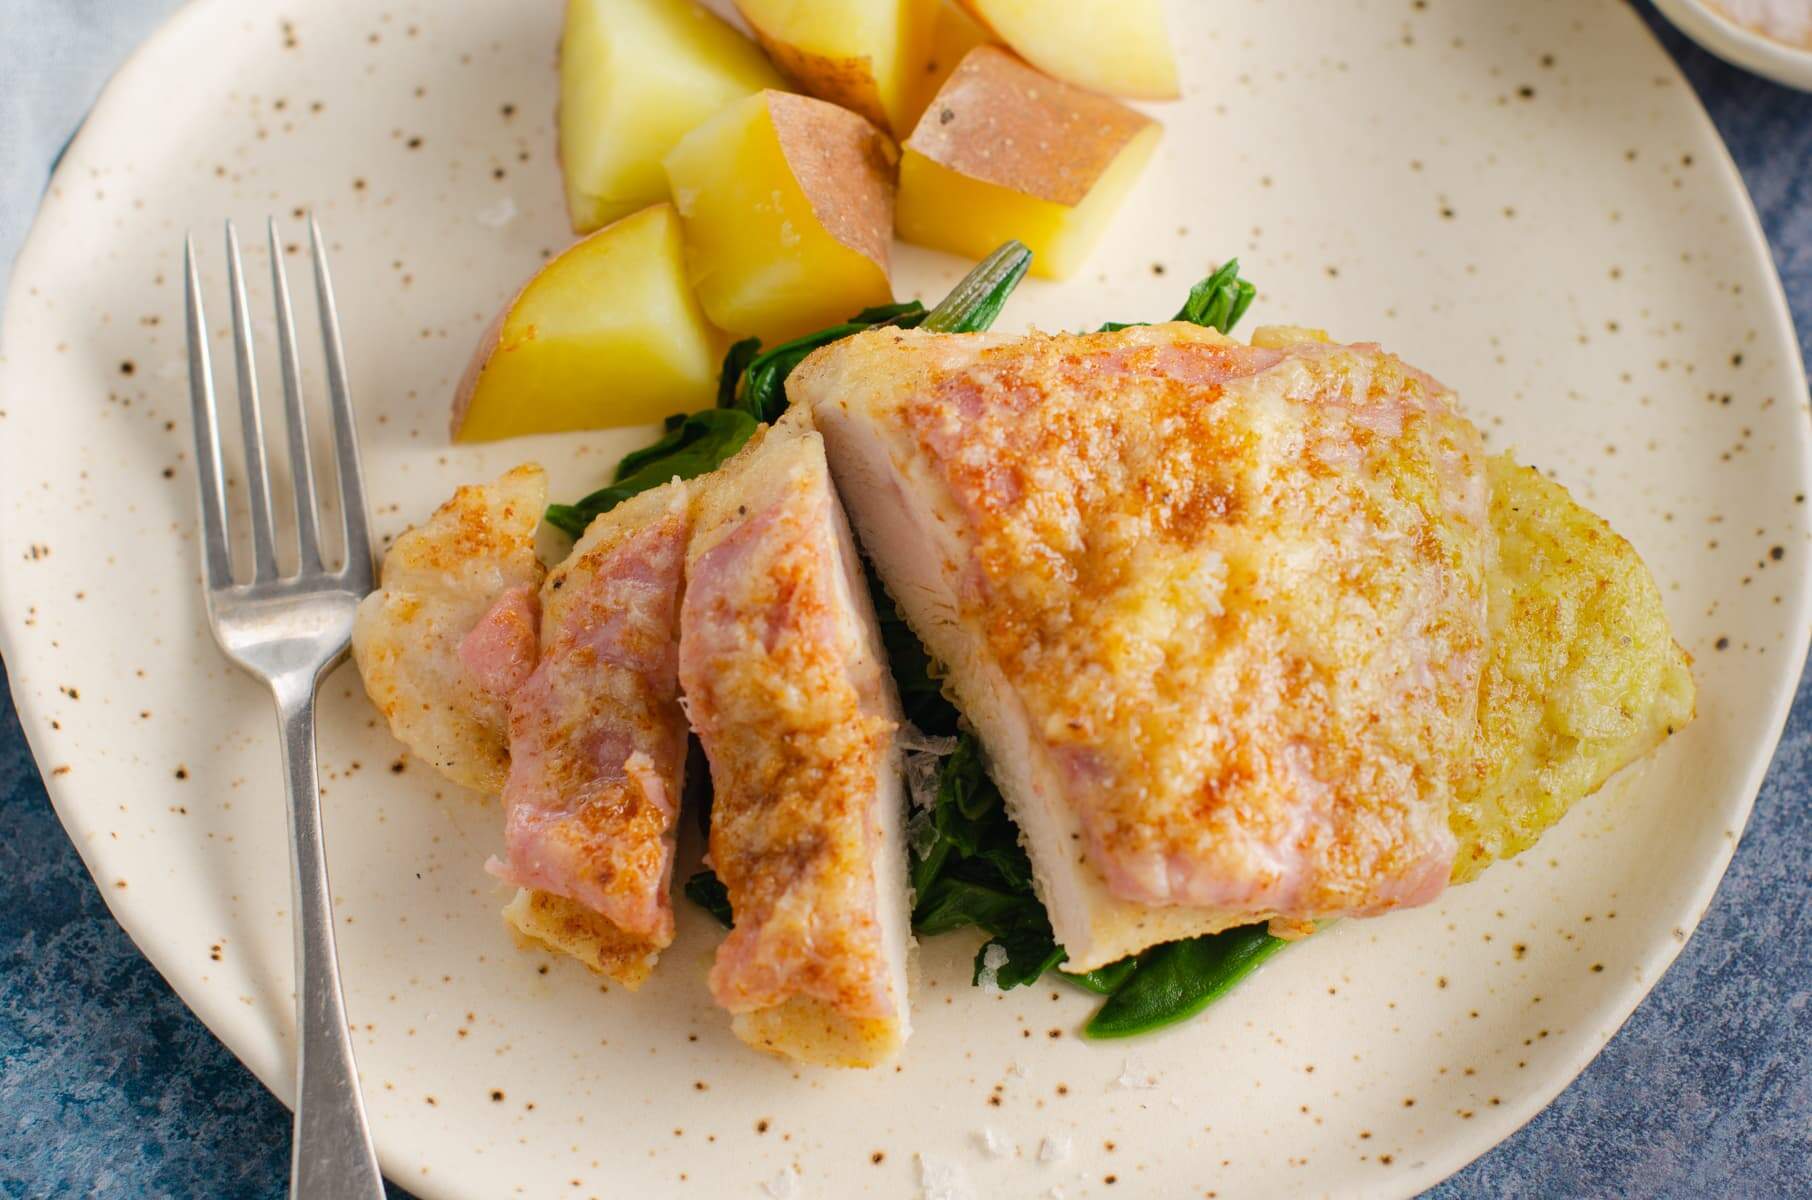 A plate of pan fried chicken topped with ham and parmesan cheese served with new potatoes and wilted greens.